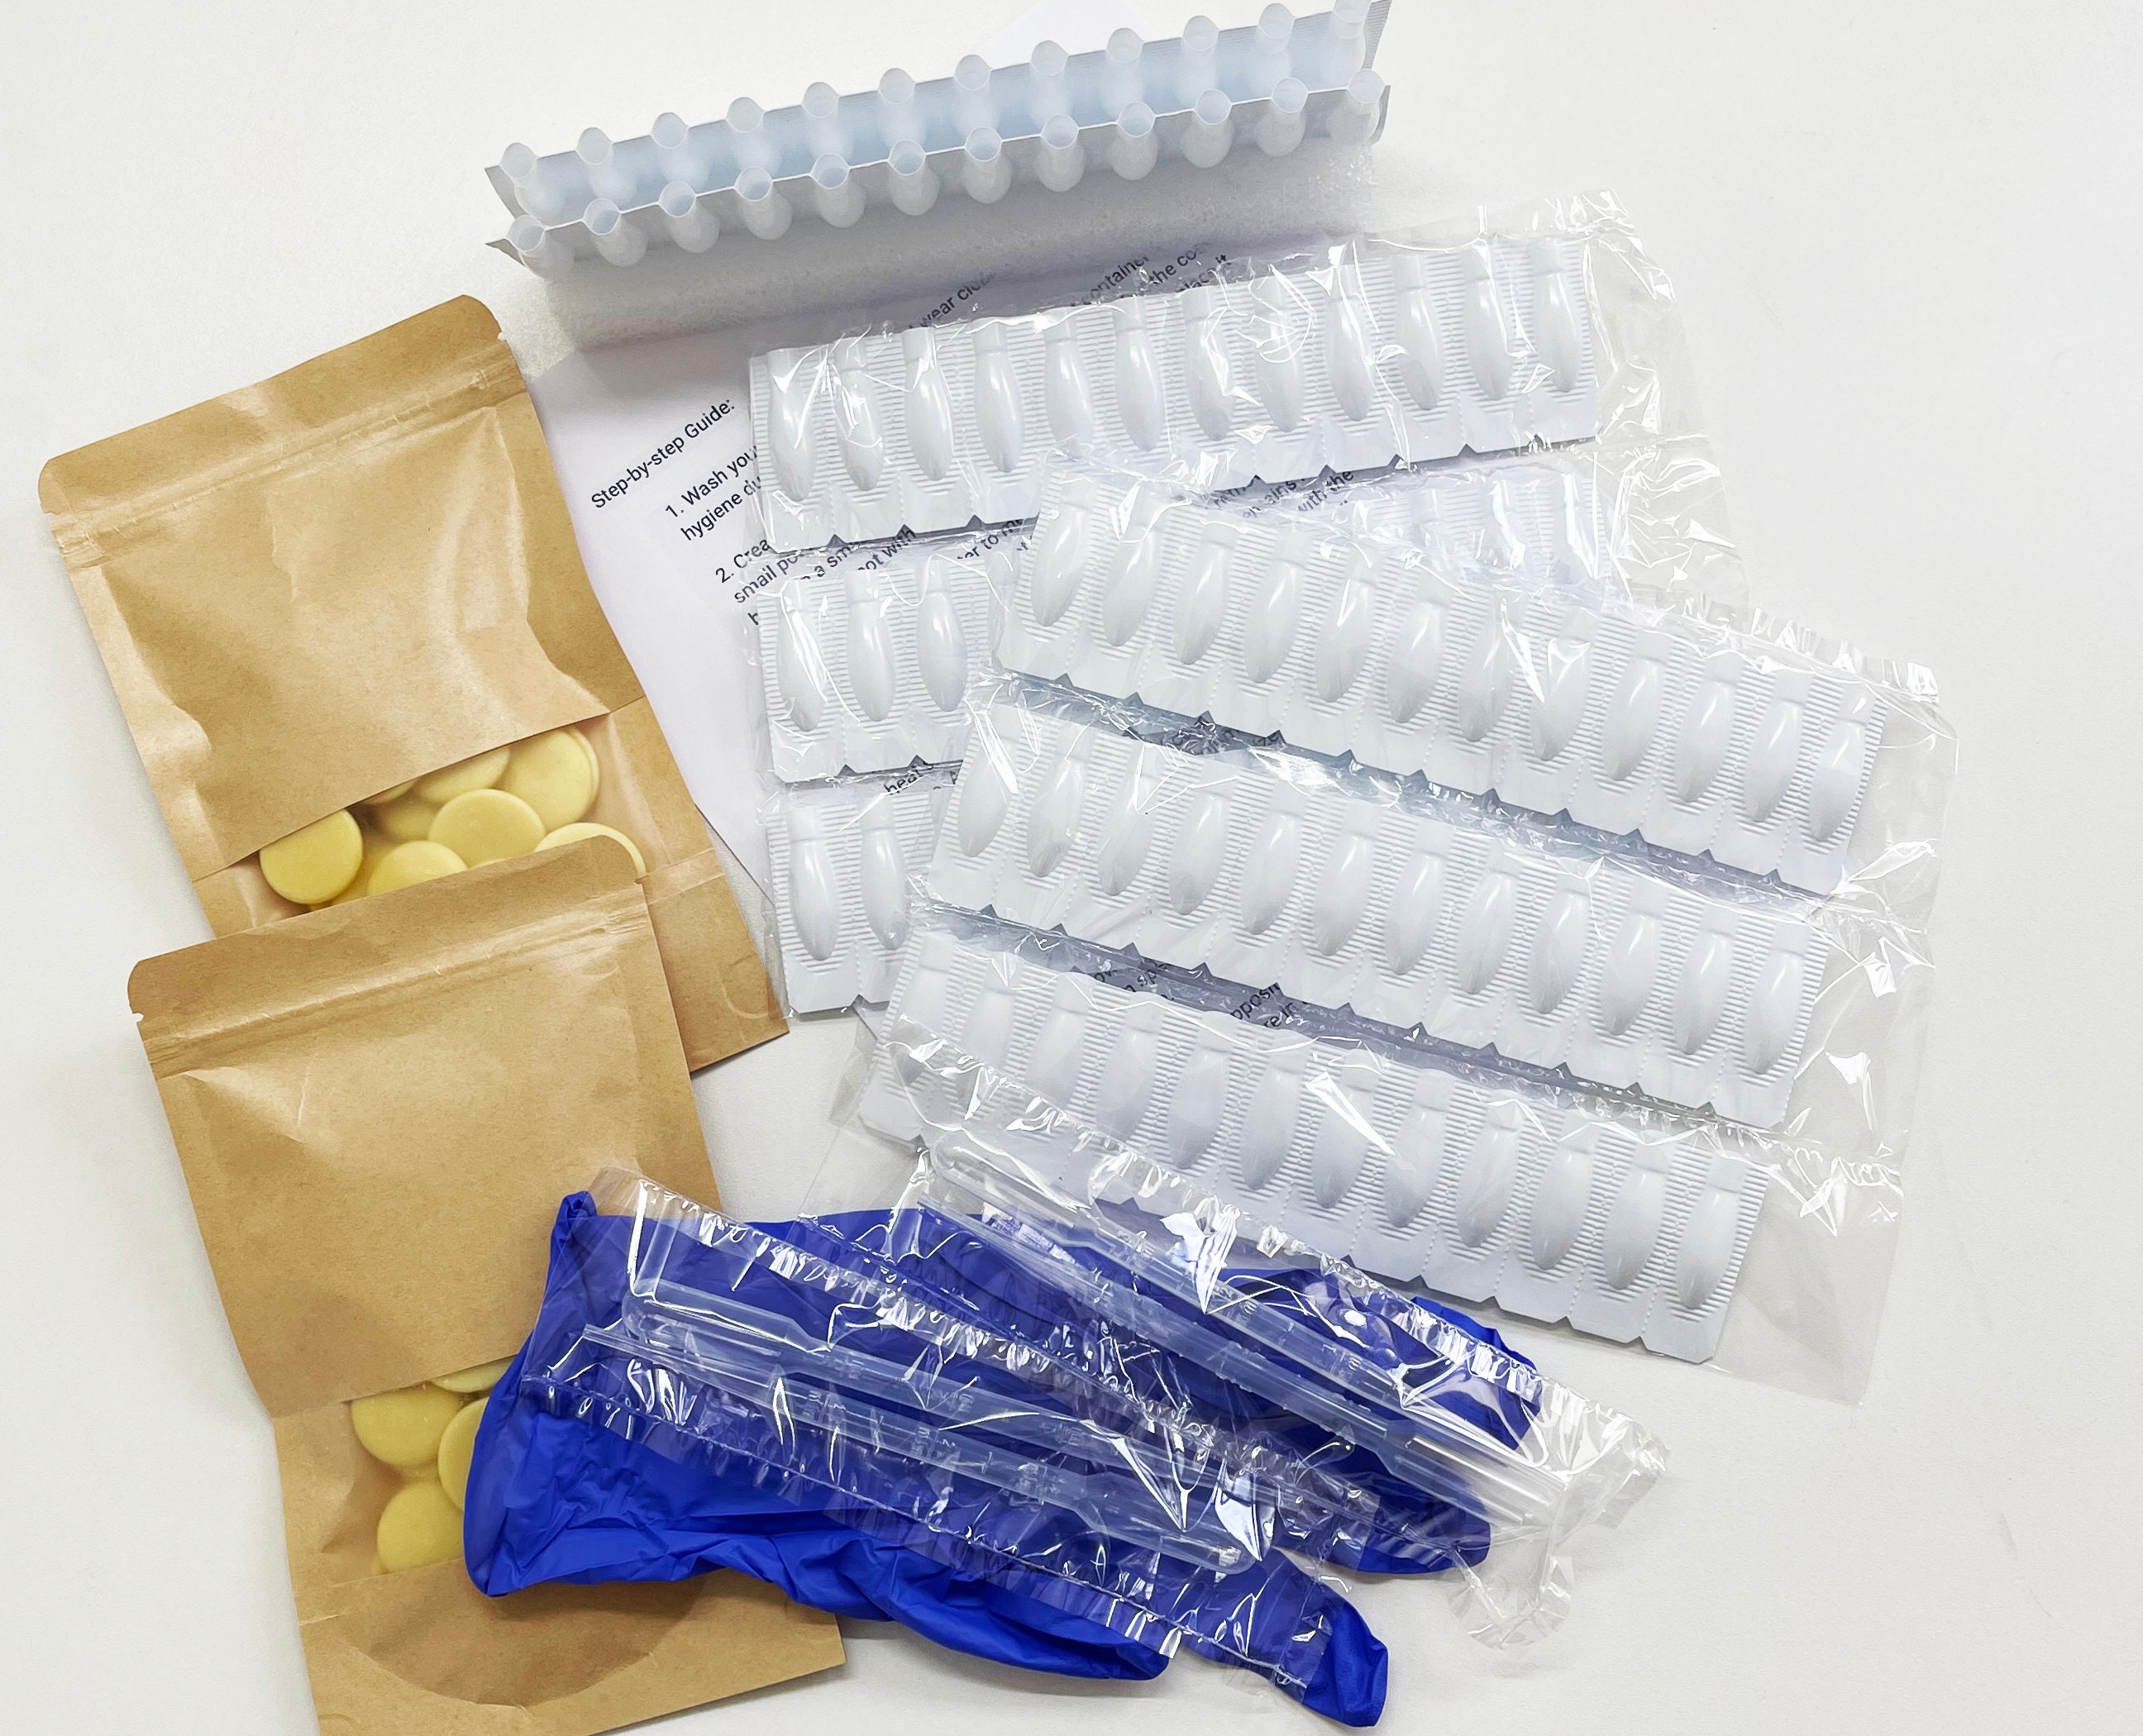 Suppository Mold Kit Made in France, 3 Sizes 1 Ml, 2 Ml, 3 Ml, Reusable  Suppository Manufacturing Molds Lab Quality 